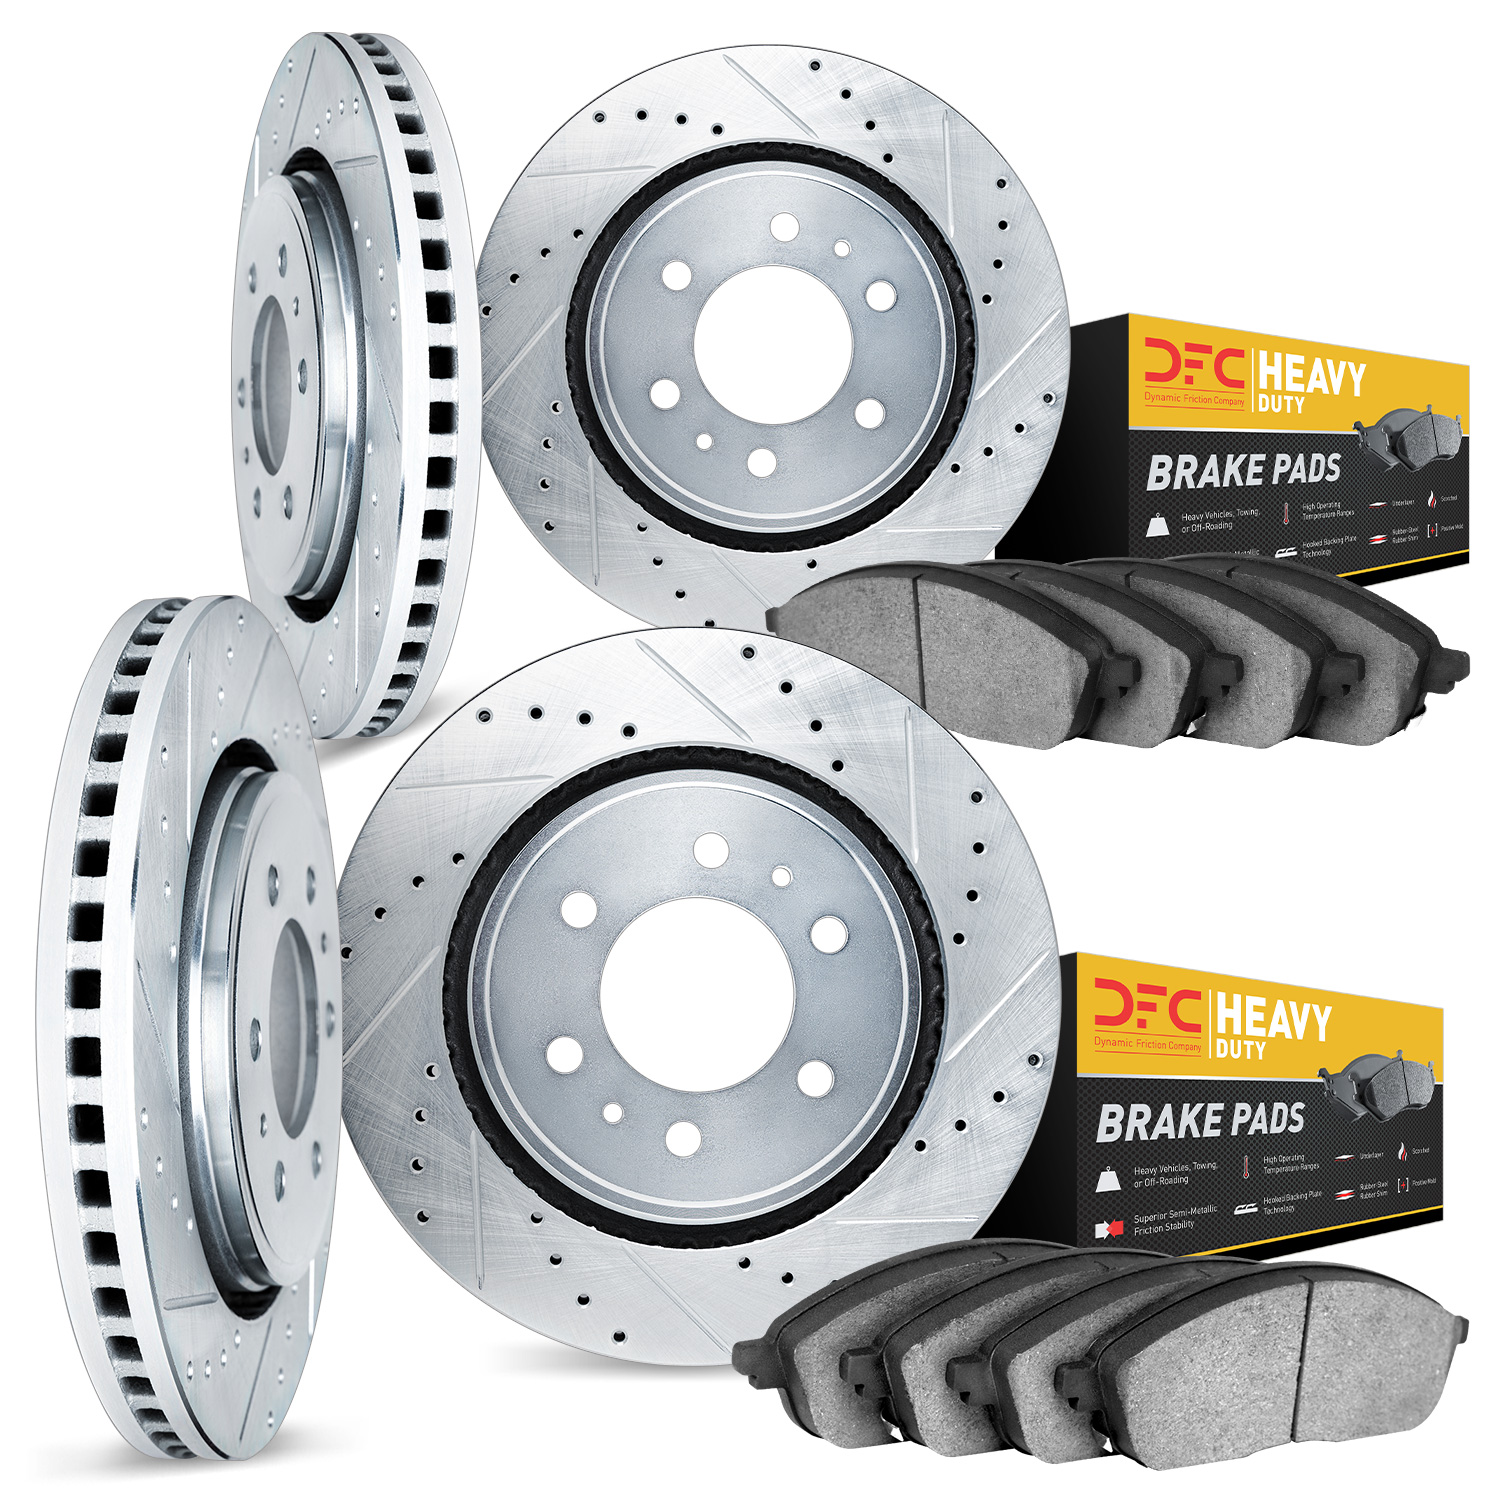 7204-48075 Drilled/Slotted Rotors w/Heavy-Duty Brake Pads Kit [Silver], 2002-2005 GM, Position: Front and Rear